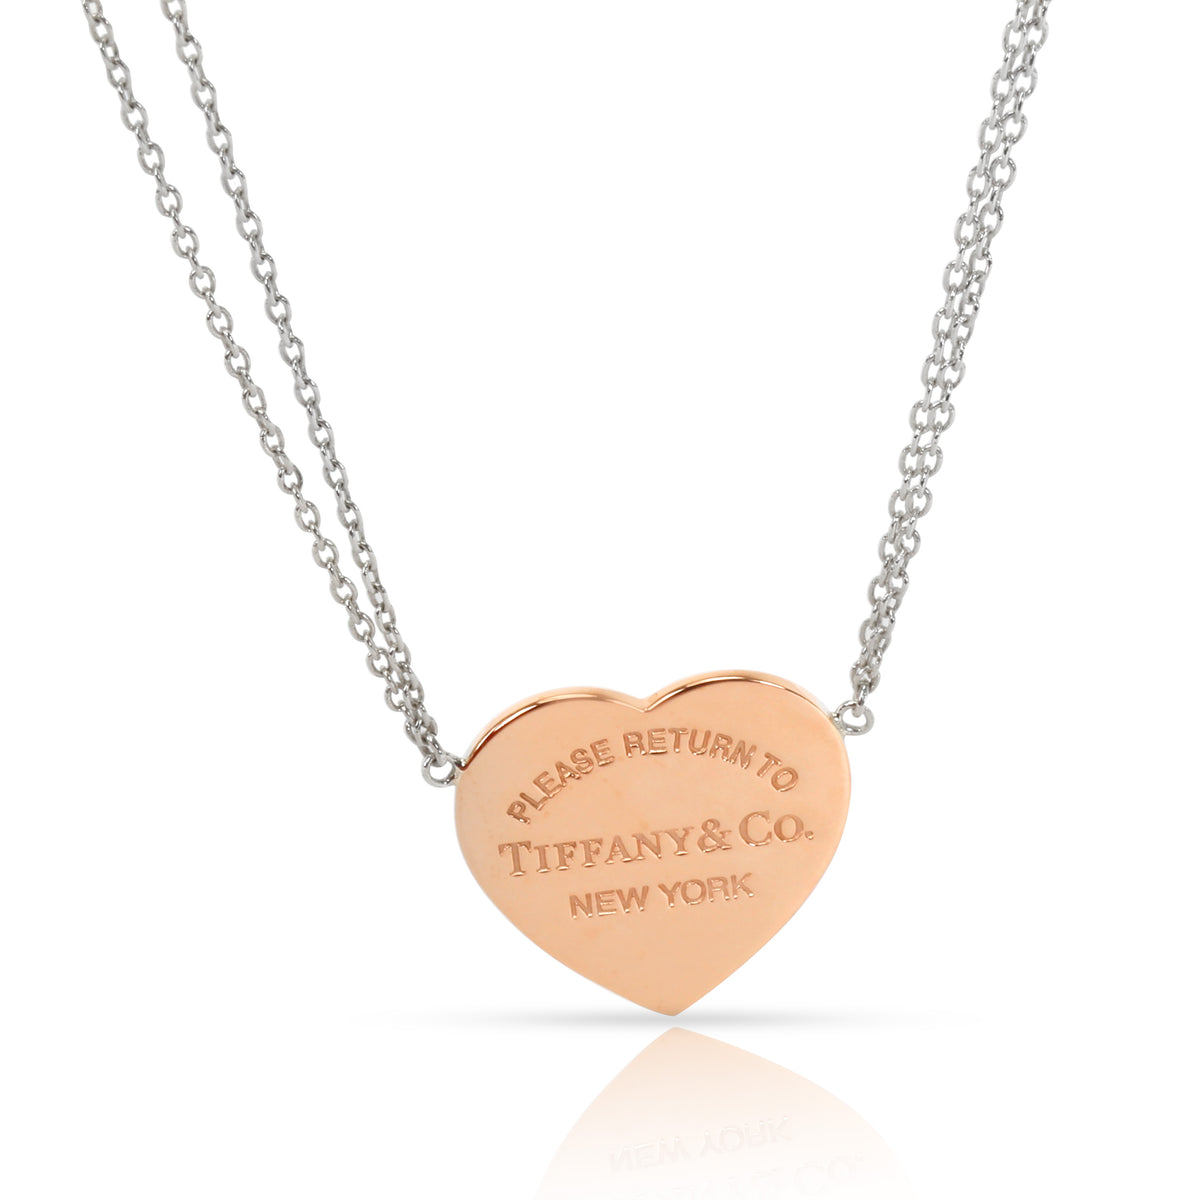 Tiffany & Co Return to Tiffany Heart Necklace in Rubedo & Sterling Silver